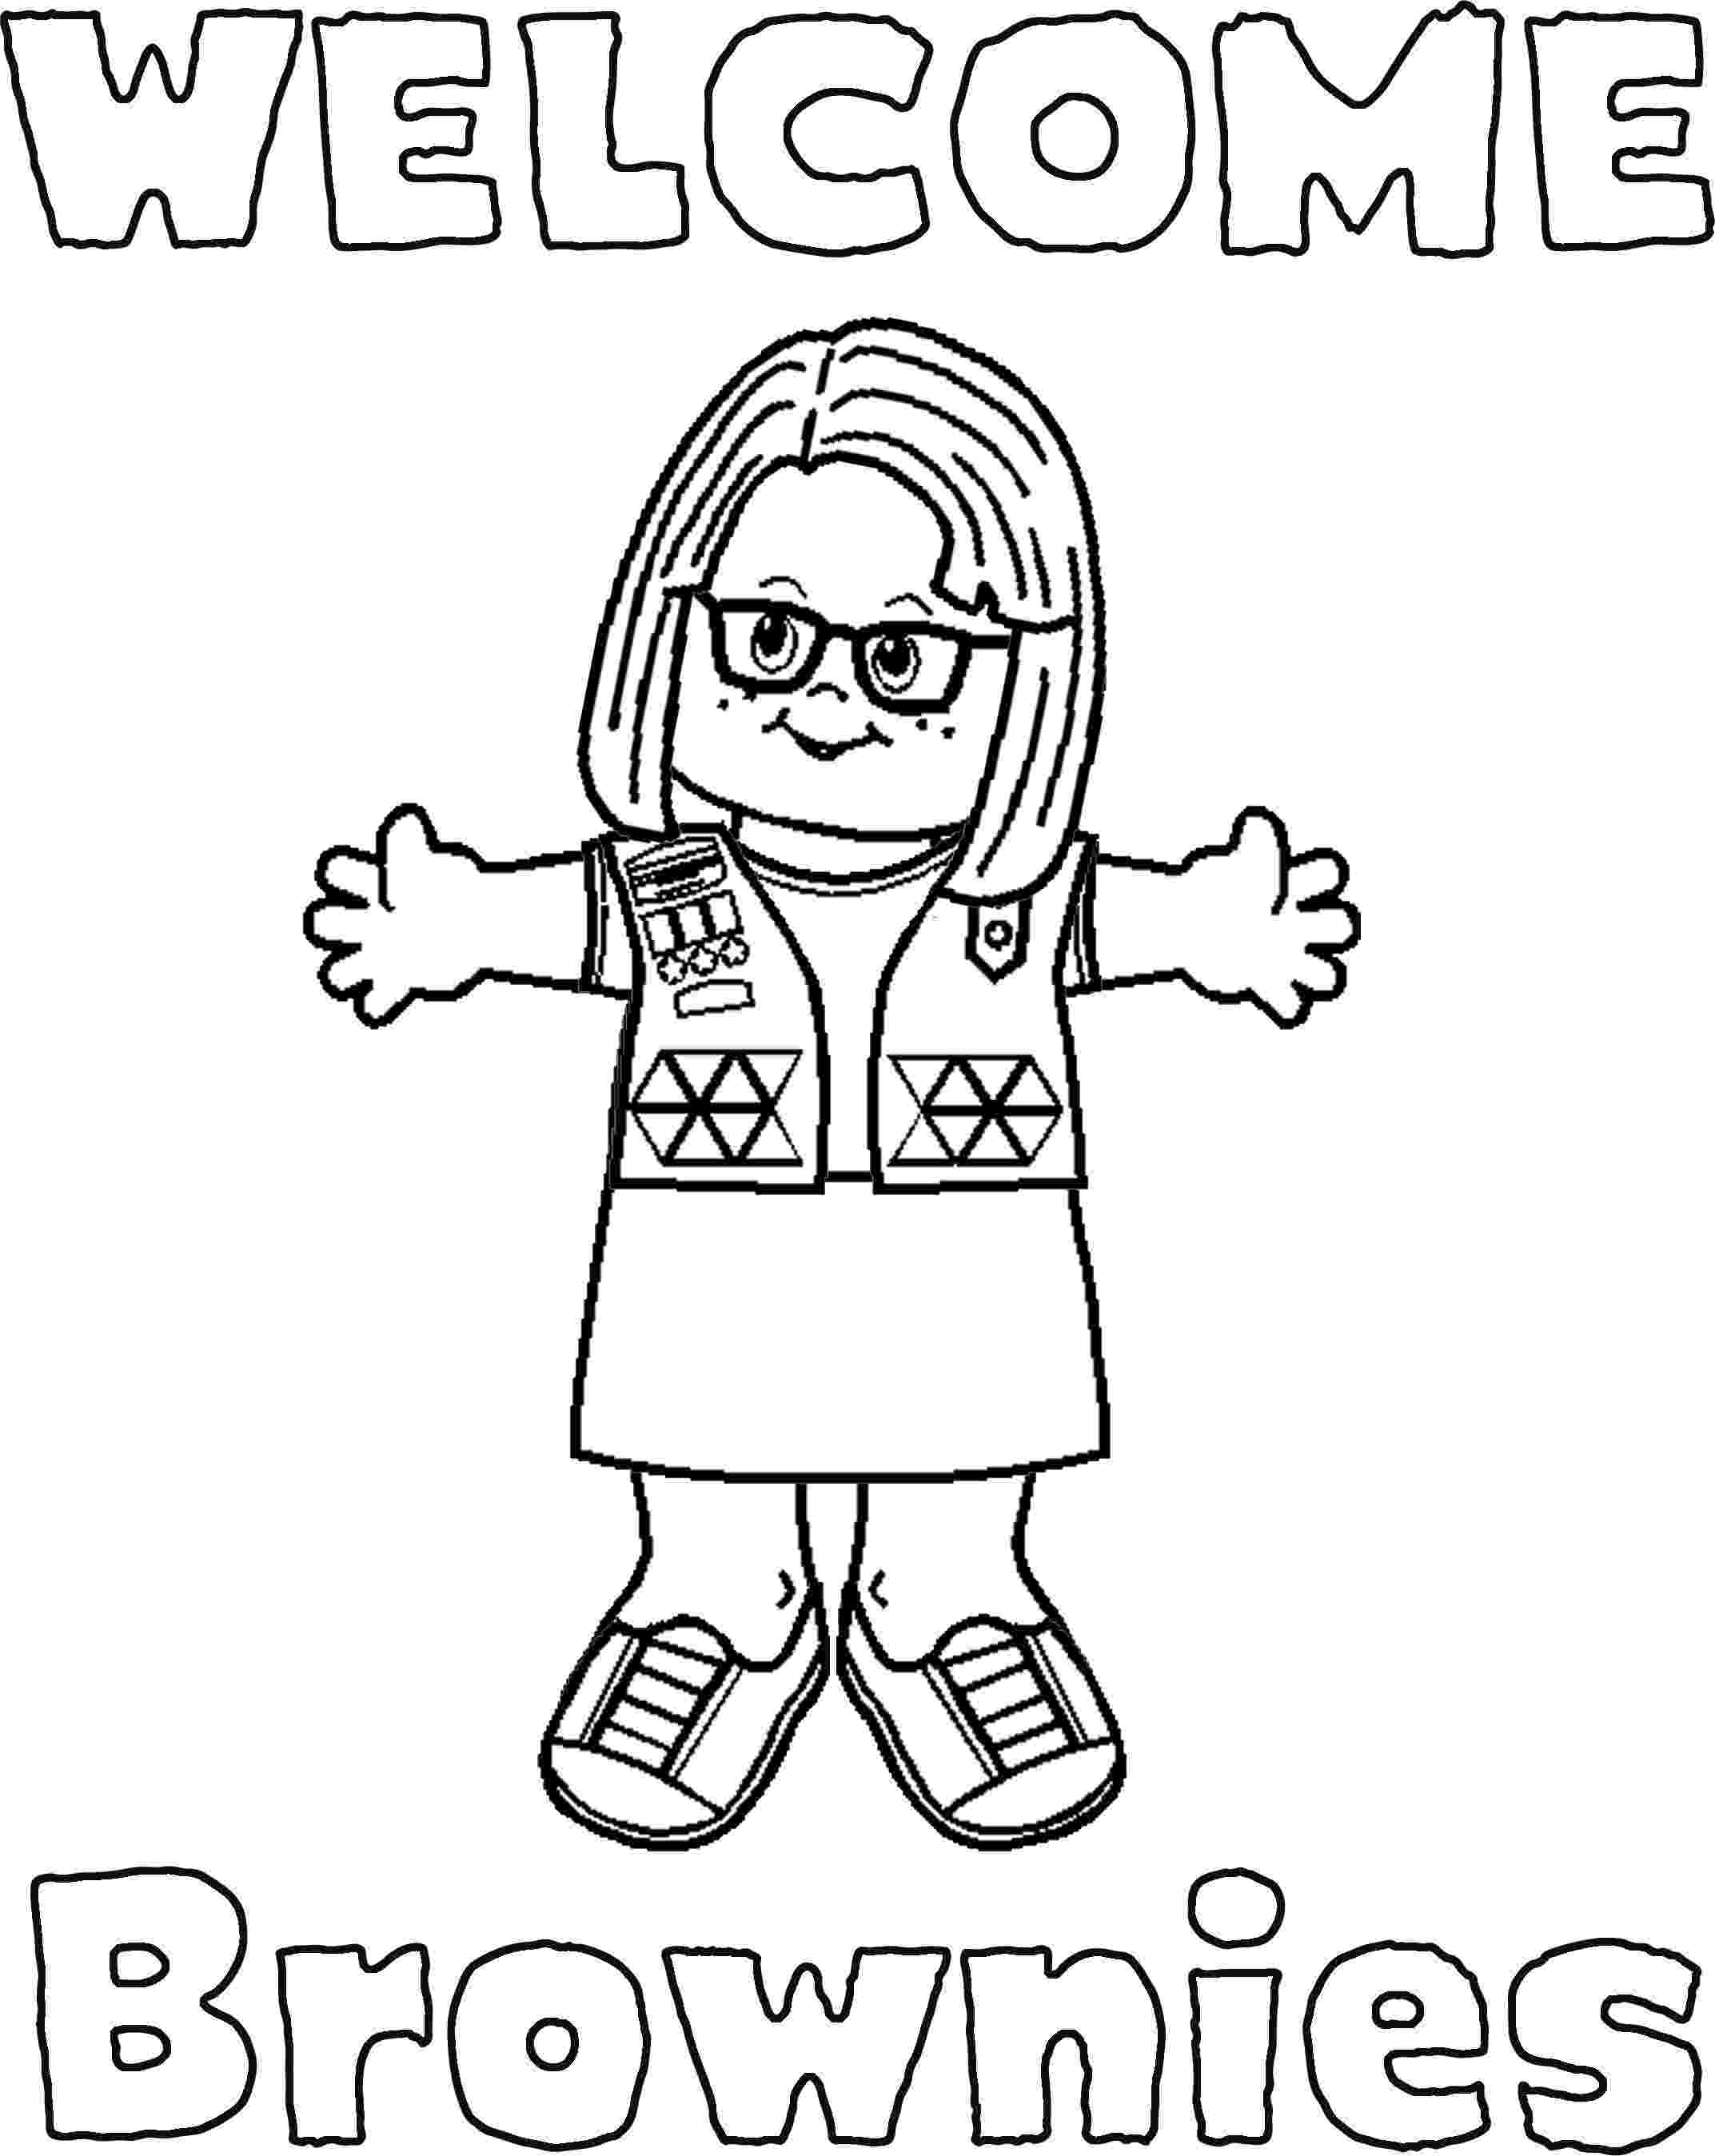 girl scout brownie coloring pages girl scout brownie coloring pages gina39s board pinterest pages girl scout brownie coloring 